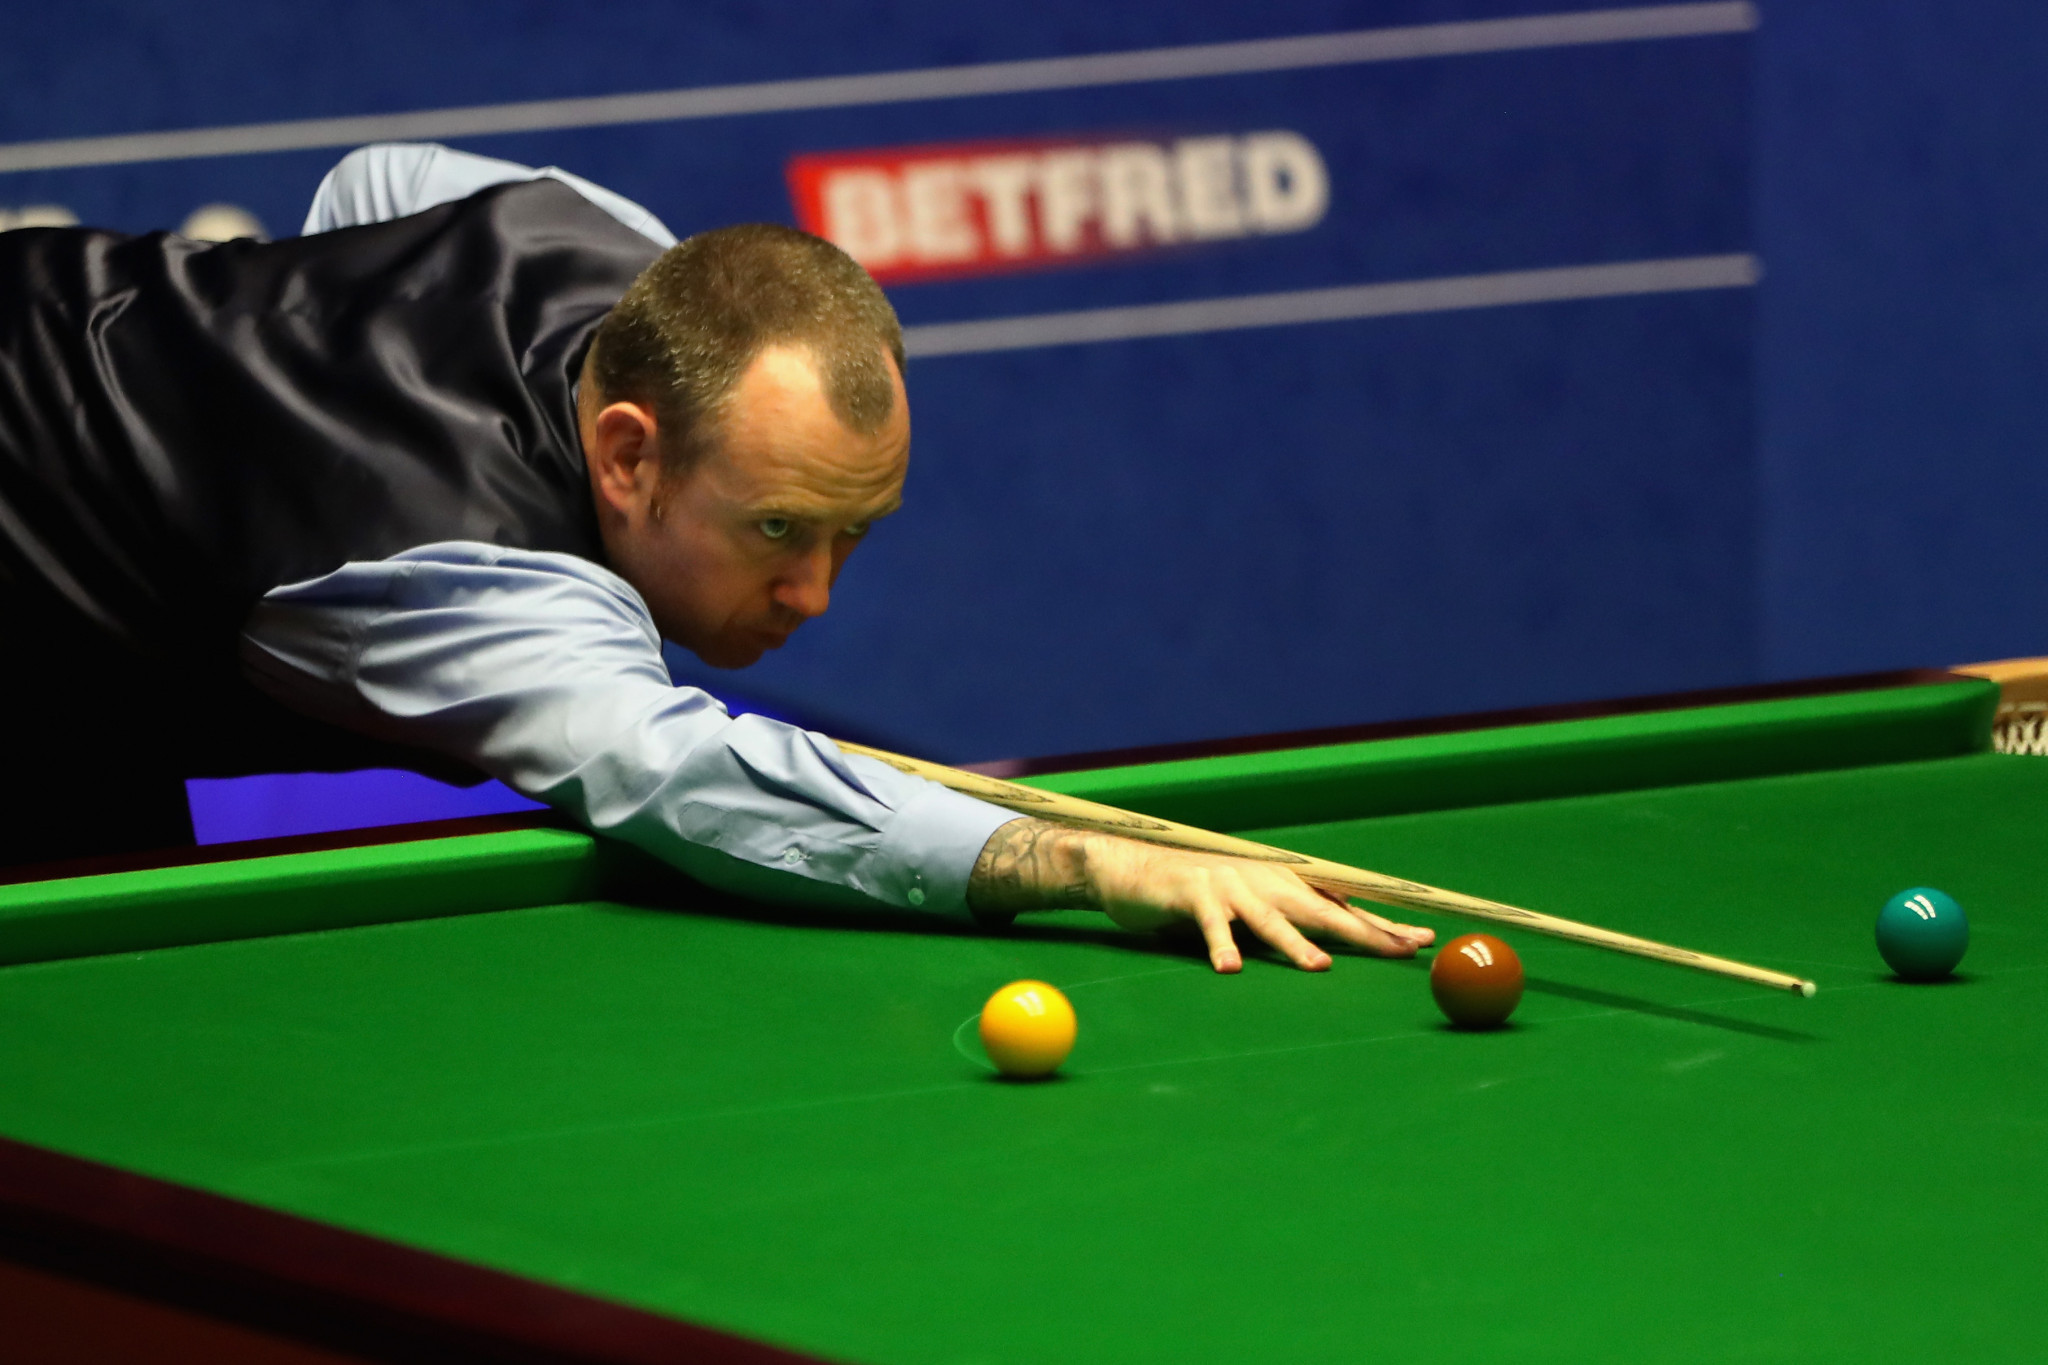 Reigning champion Mark Williams went to hospital with chest pains following the first session of his second-round World Snooker Championship match in Sheffield ©Getty Images